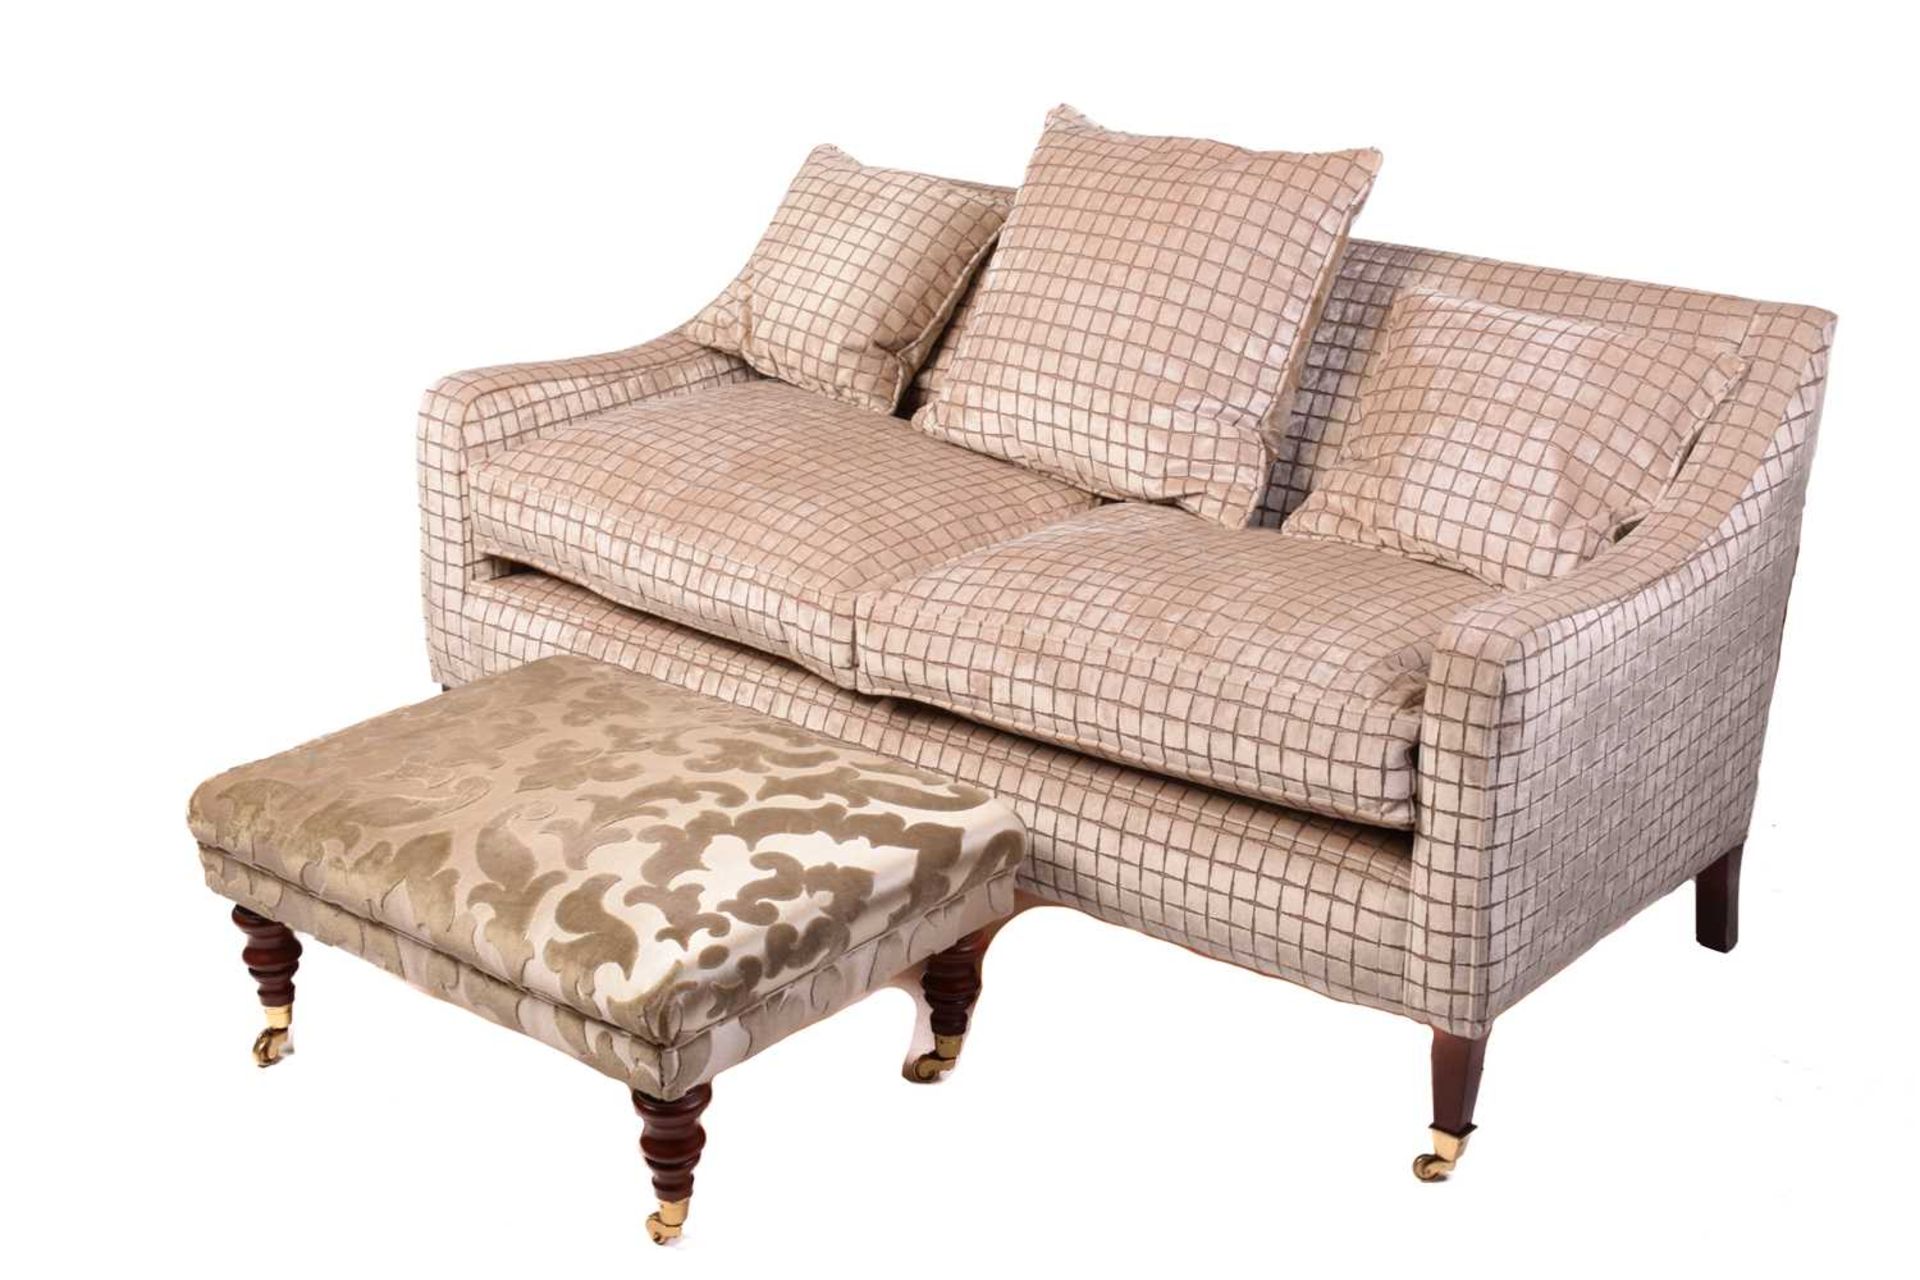 A Regency style settee, 20th century, well upholstered in a square grid pattern material, on